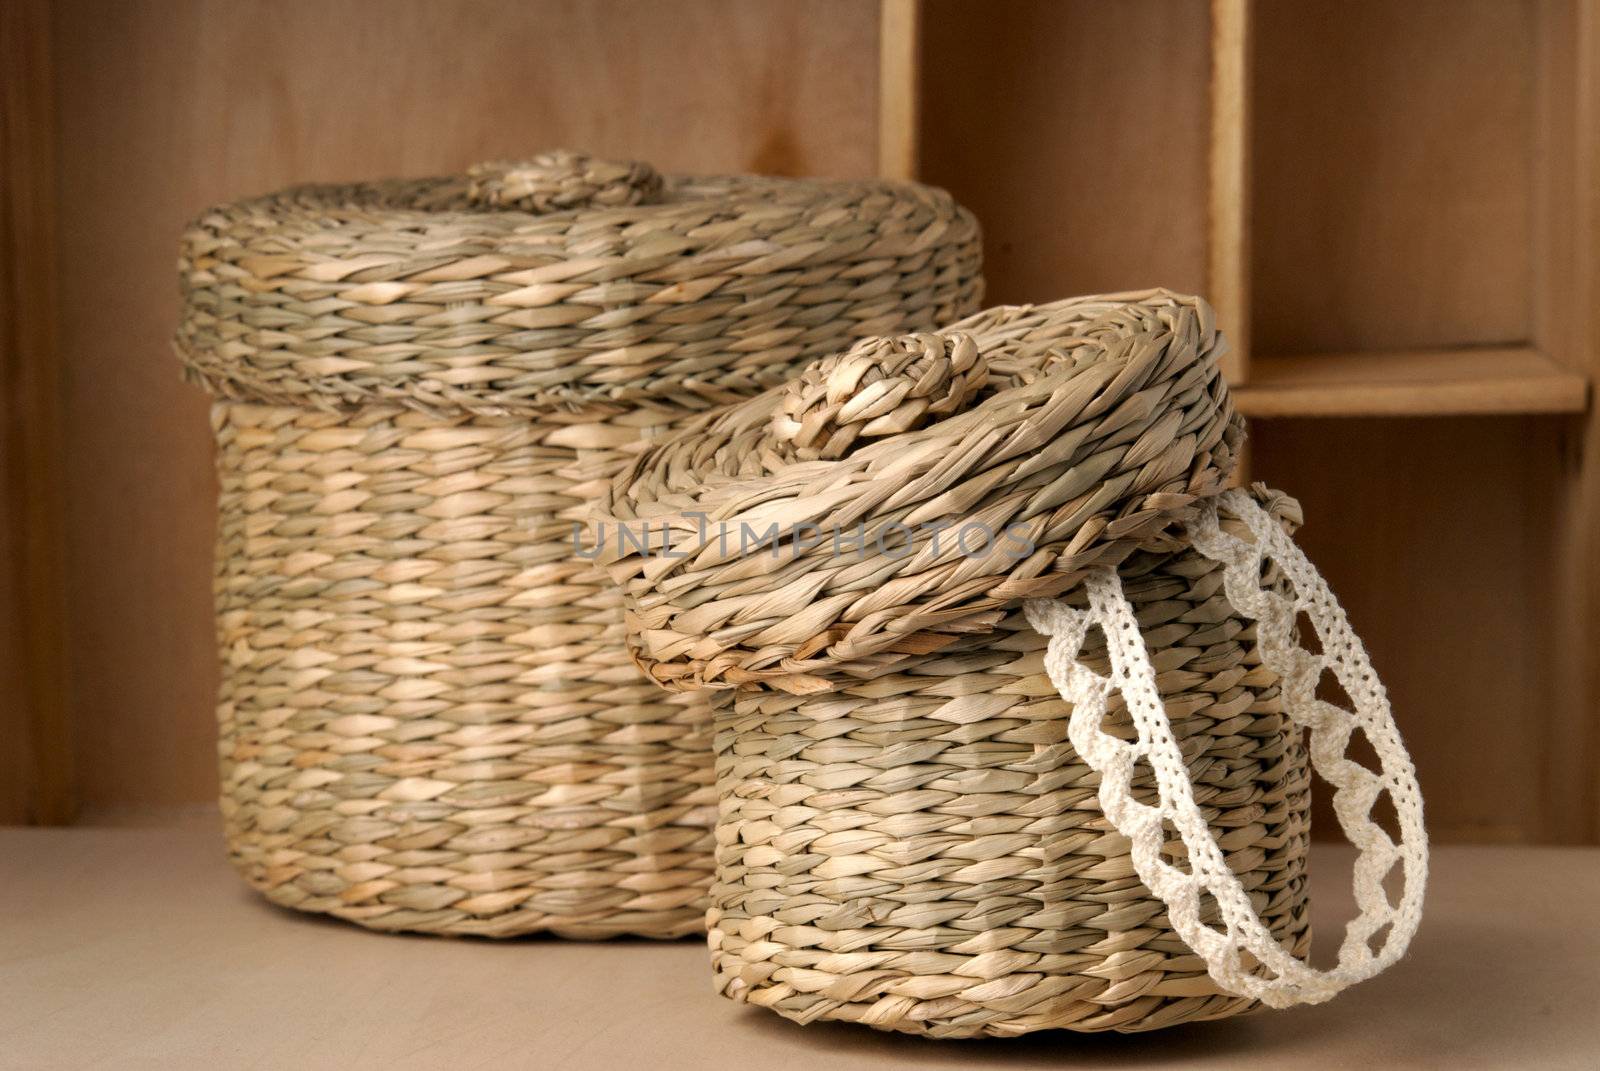 Two wattled baskets with lace closeup isolated on wooden background